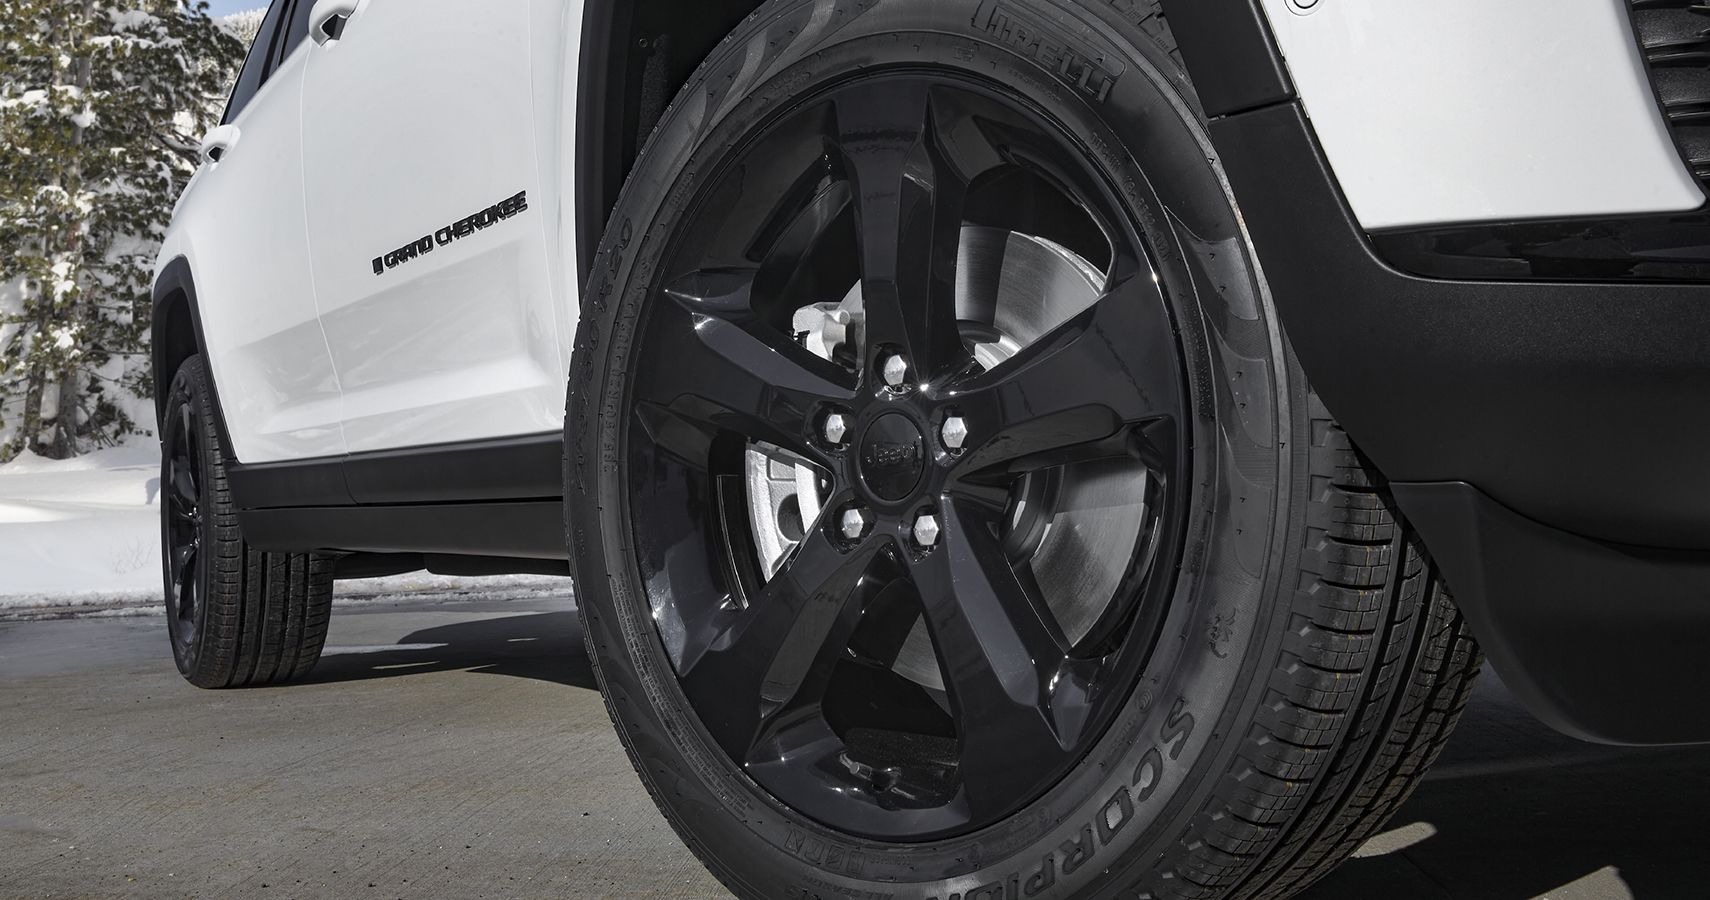 Jeep Grand Cherokee L Limited Black Package wheels